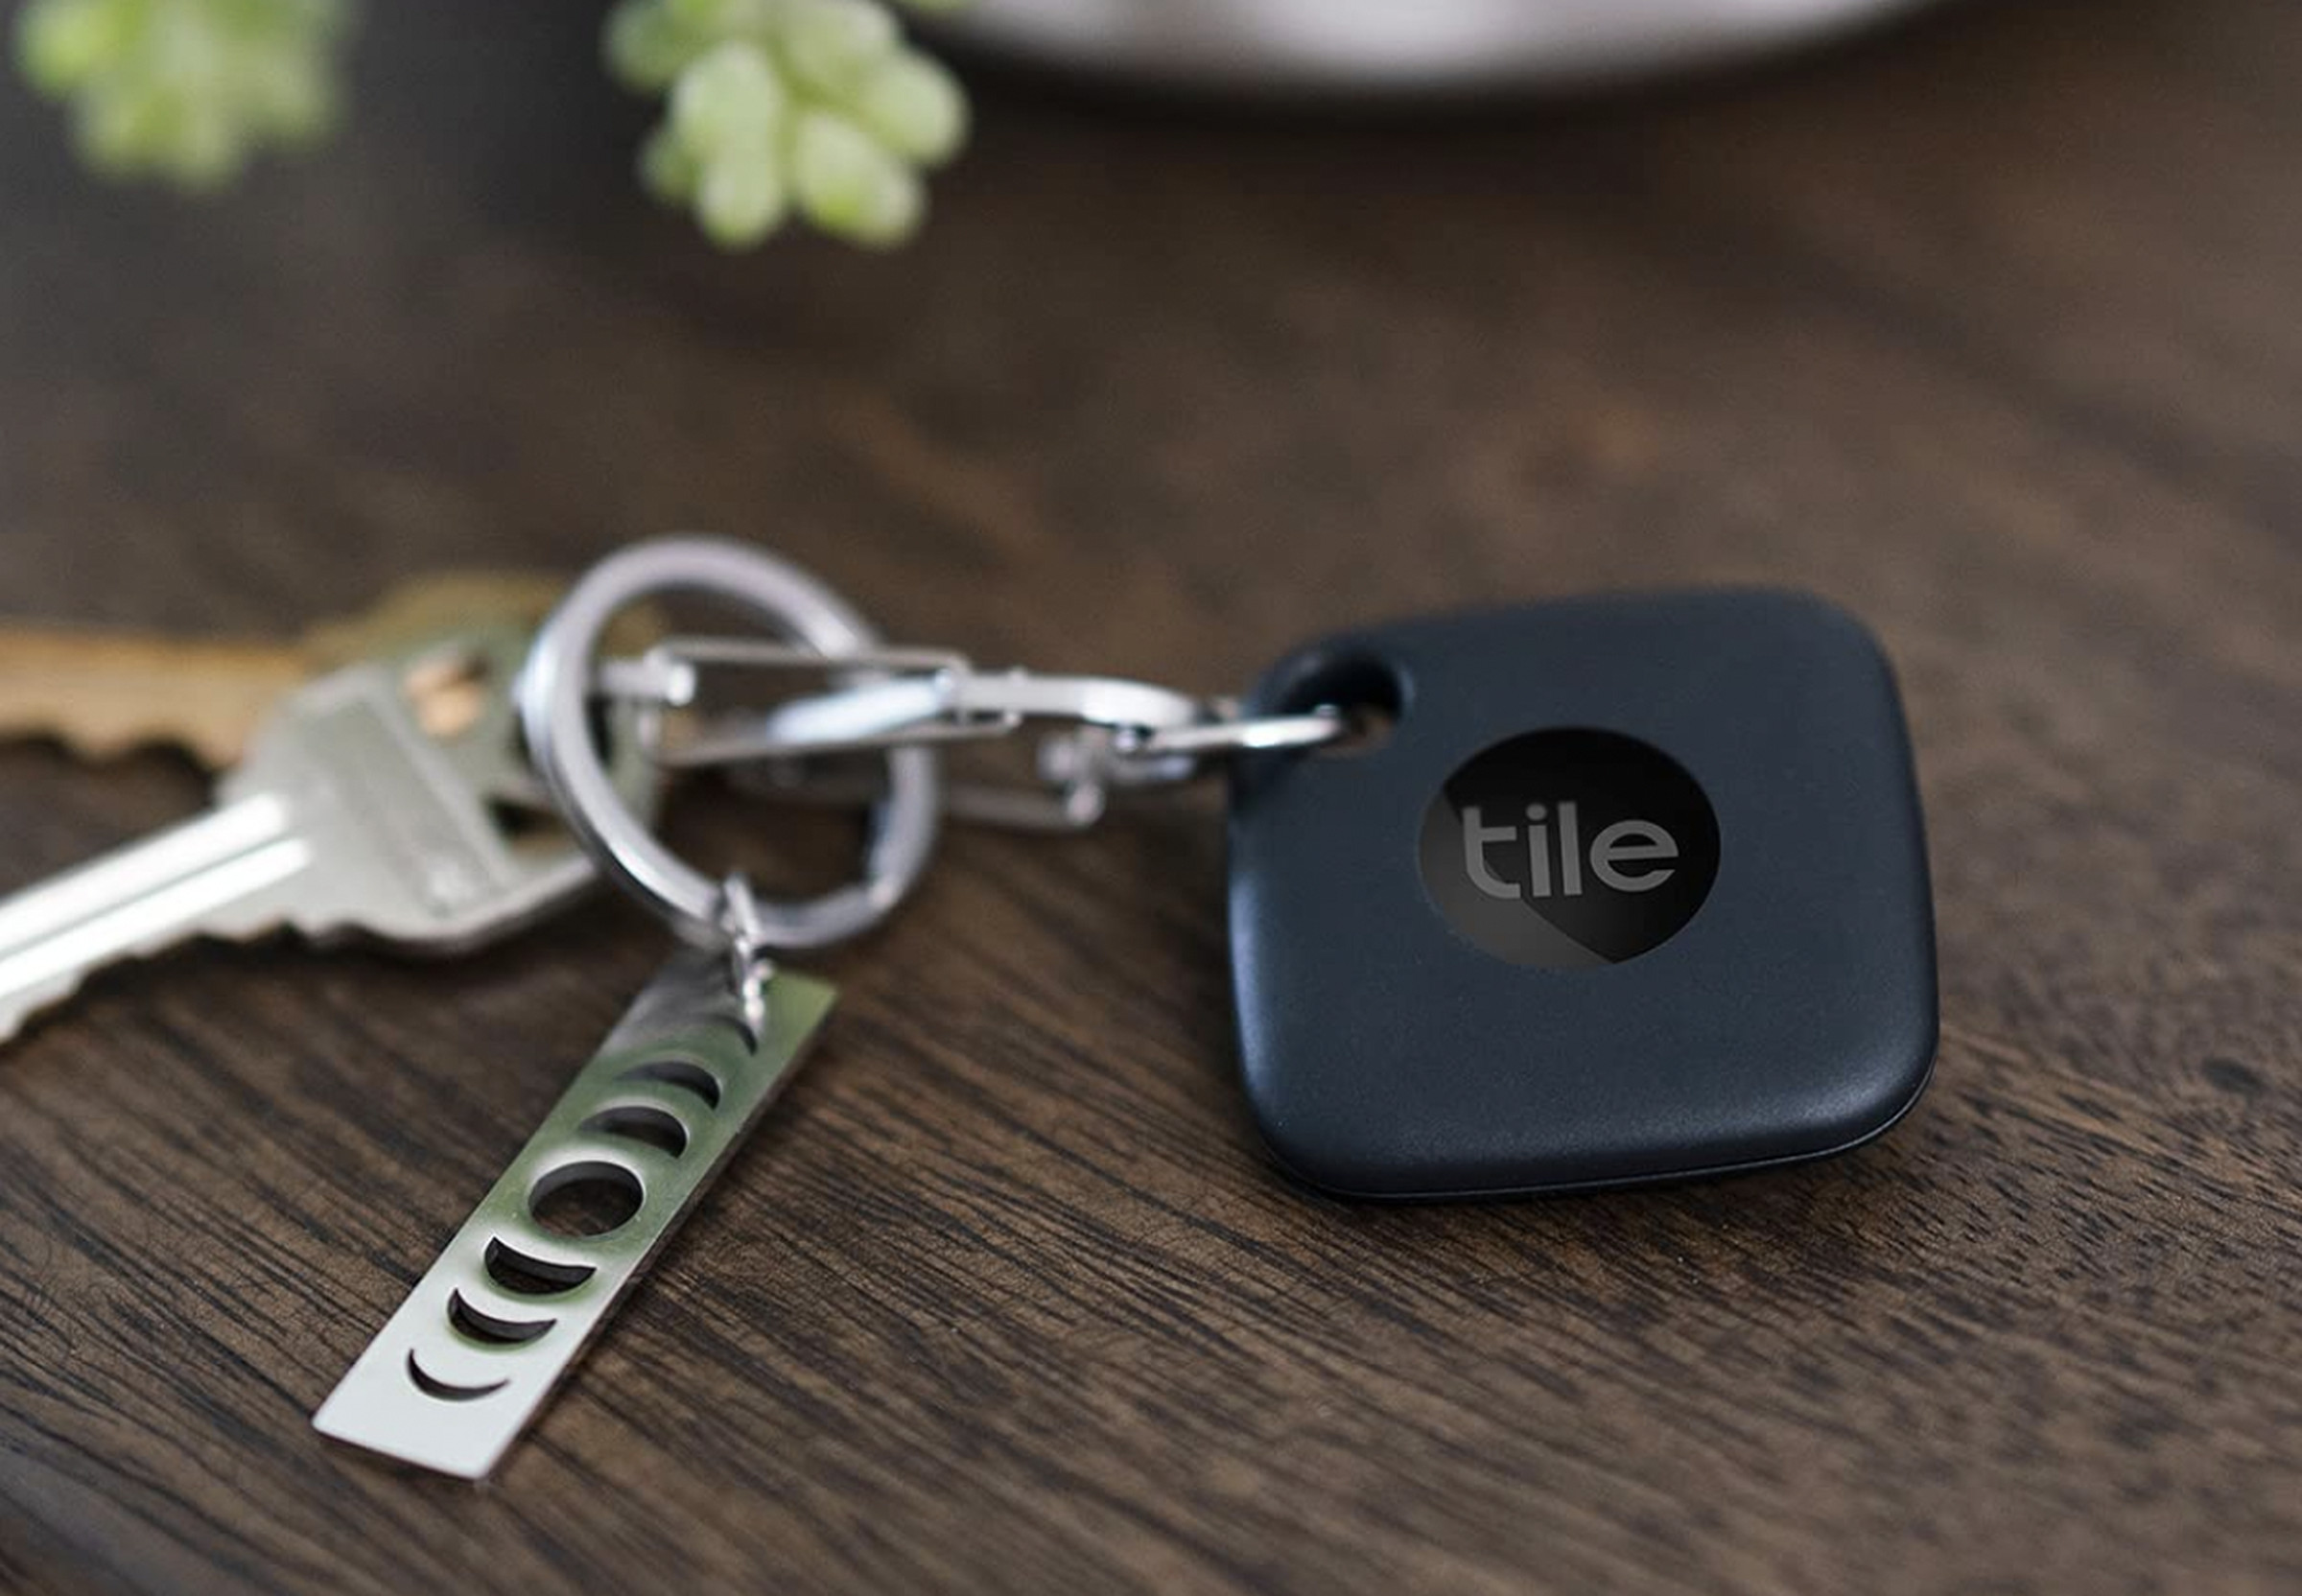 Unlike Apple’s AirTags, the Tile Mate is compatible with iOS and Android devices.